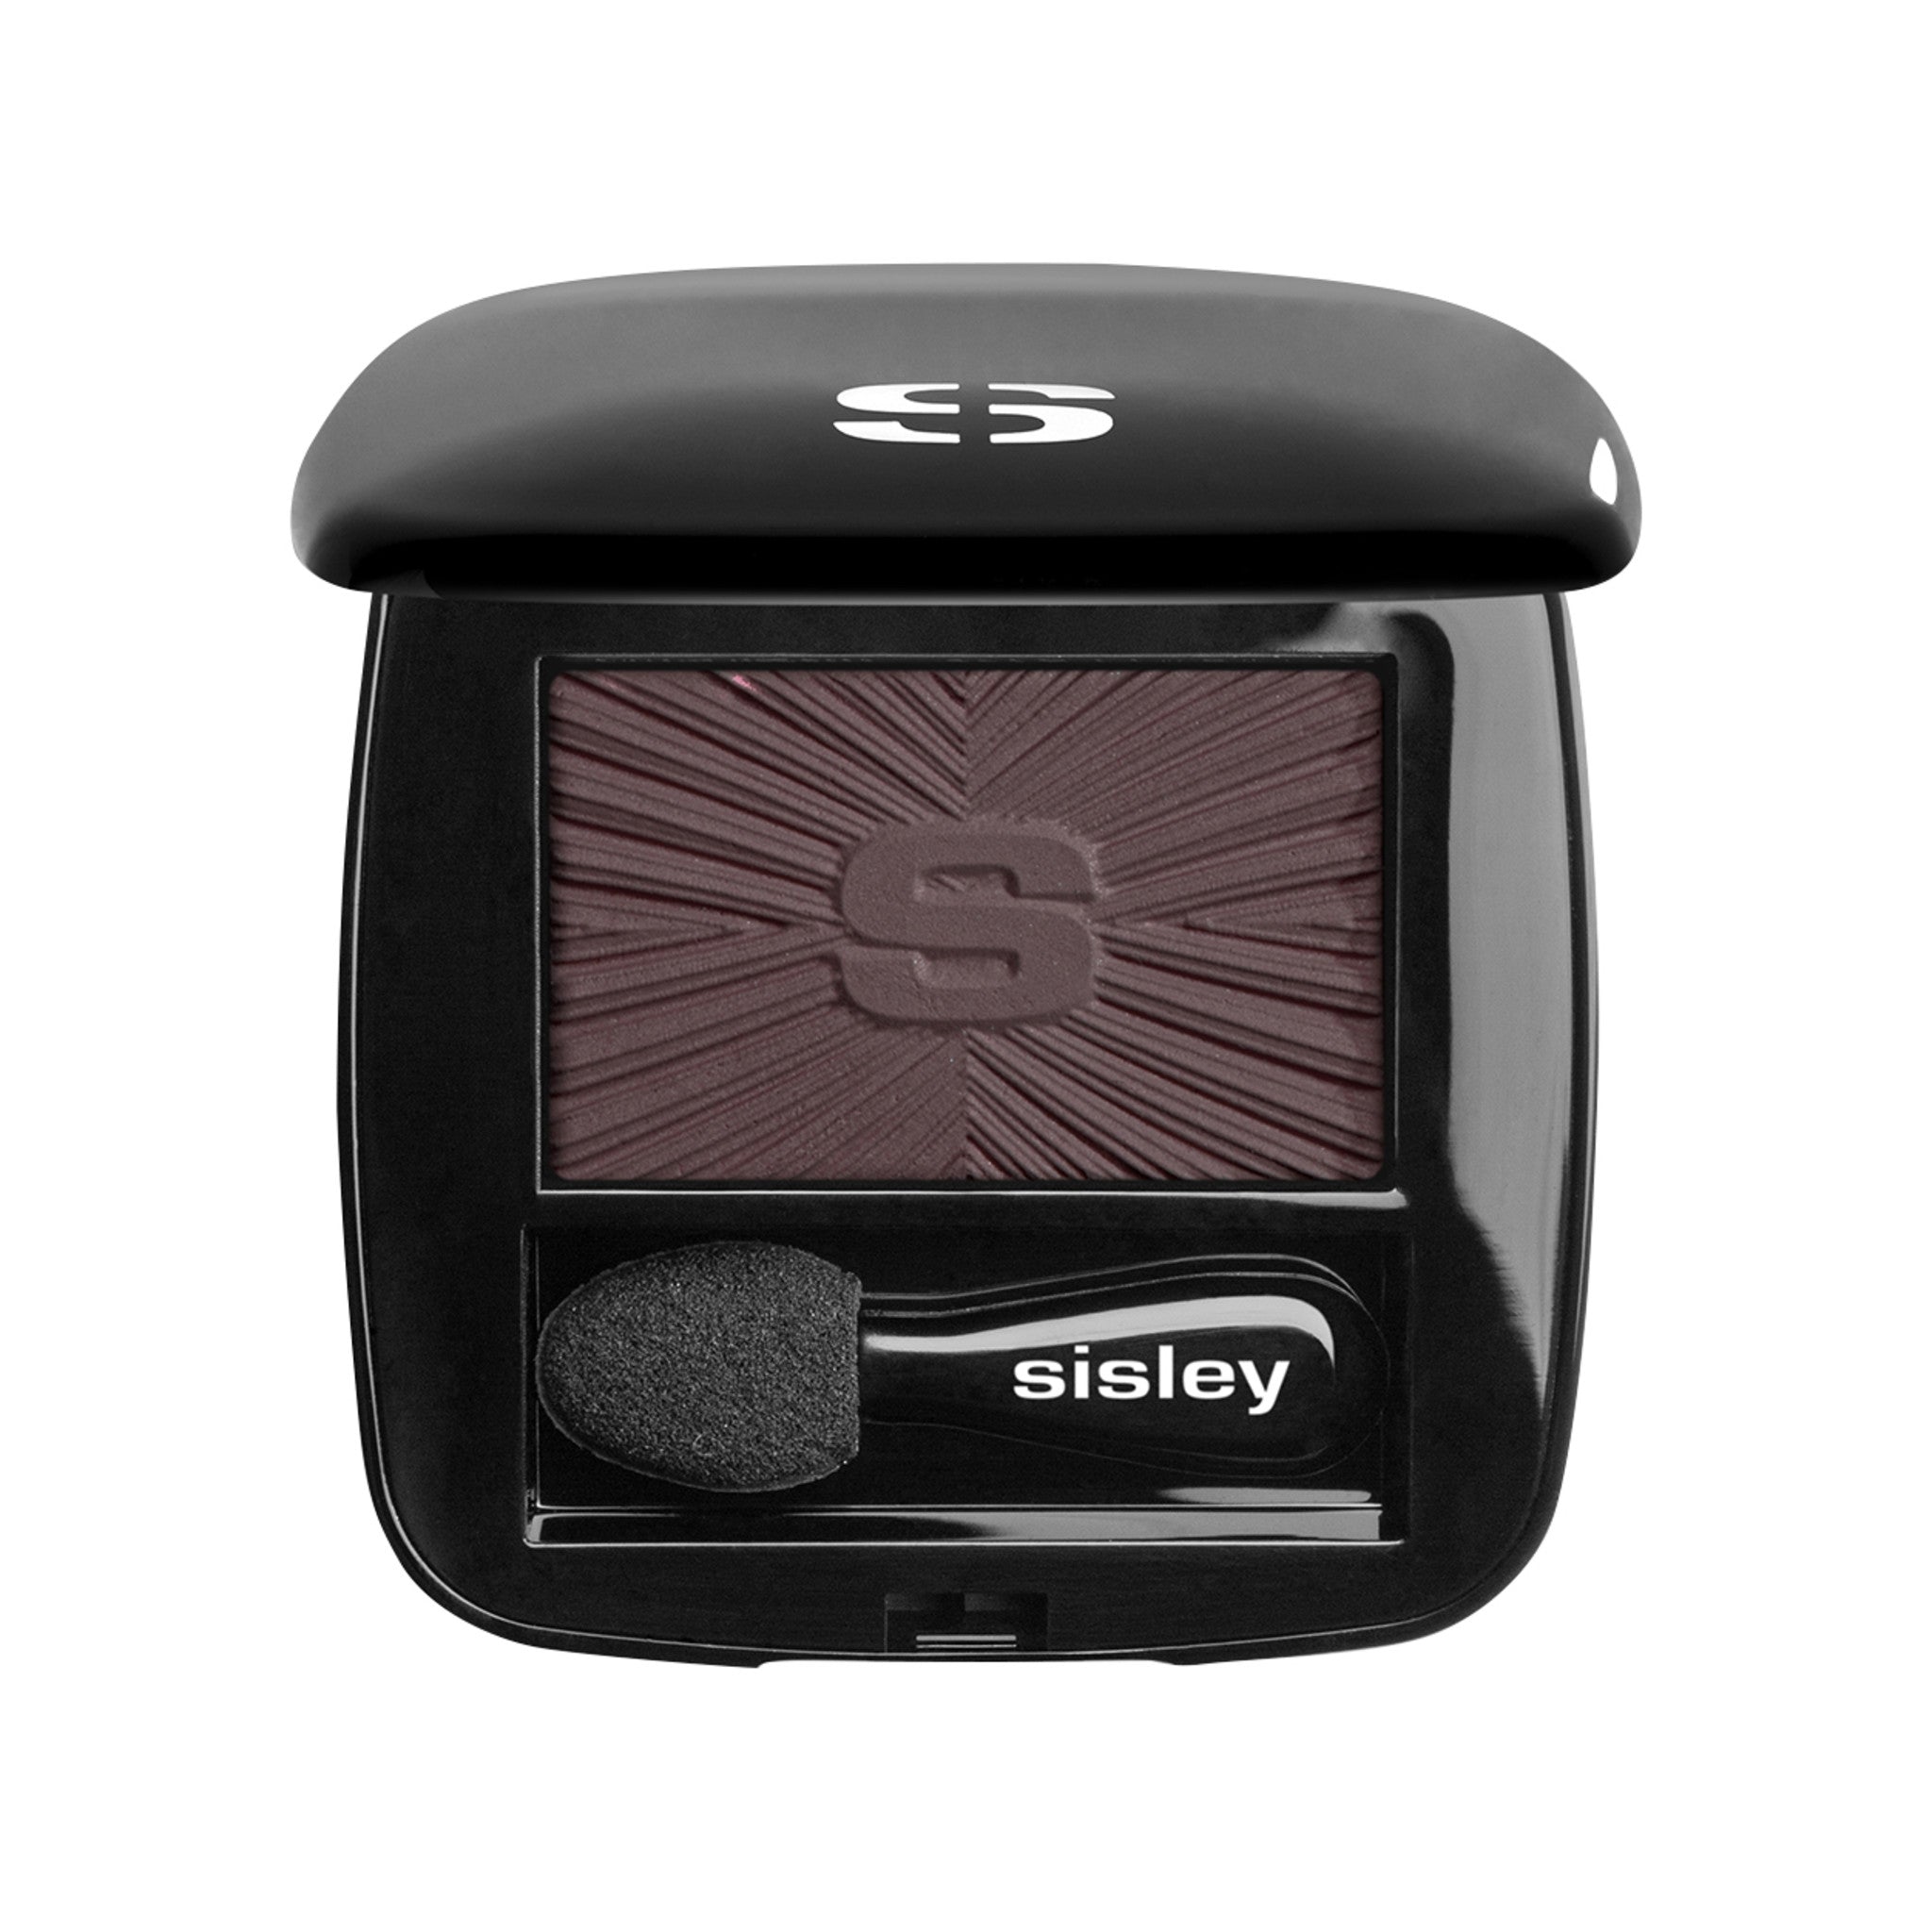 Sisley-Paris Les Phyto-Ombres Eyeshadow Color/Shade variant: 21 Matte Cocoa main image. This product is in the color brown